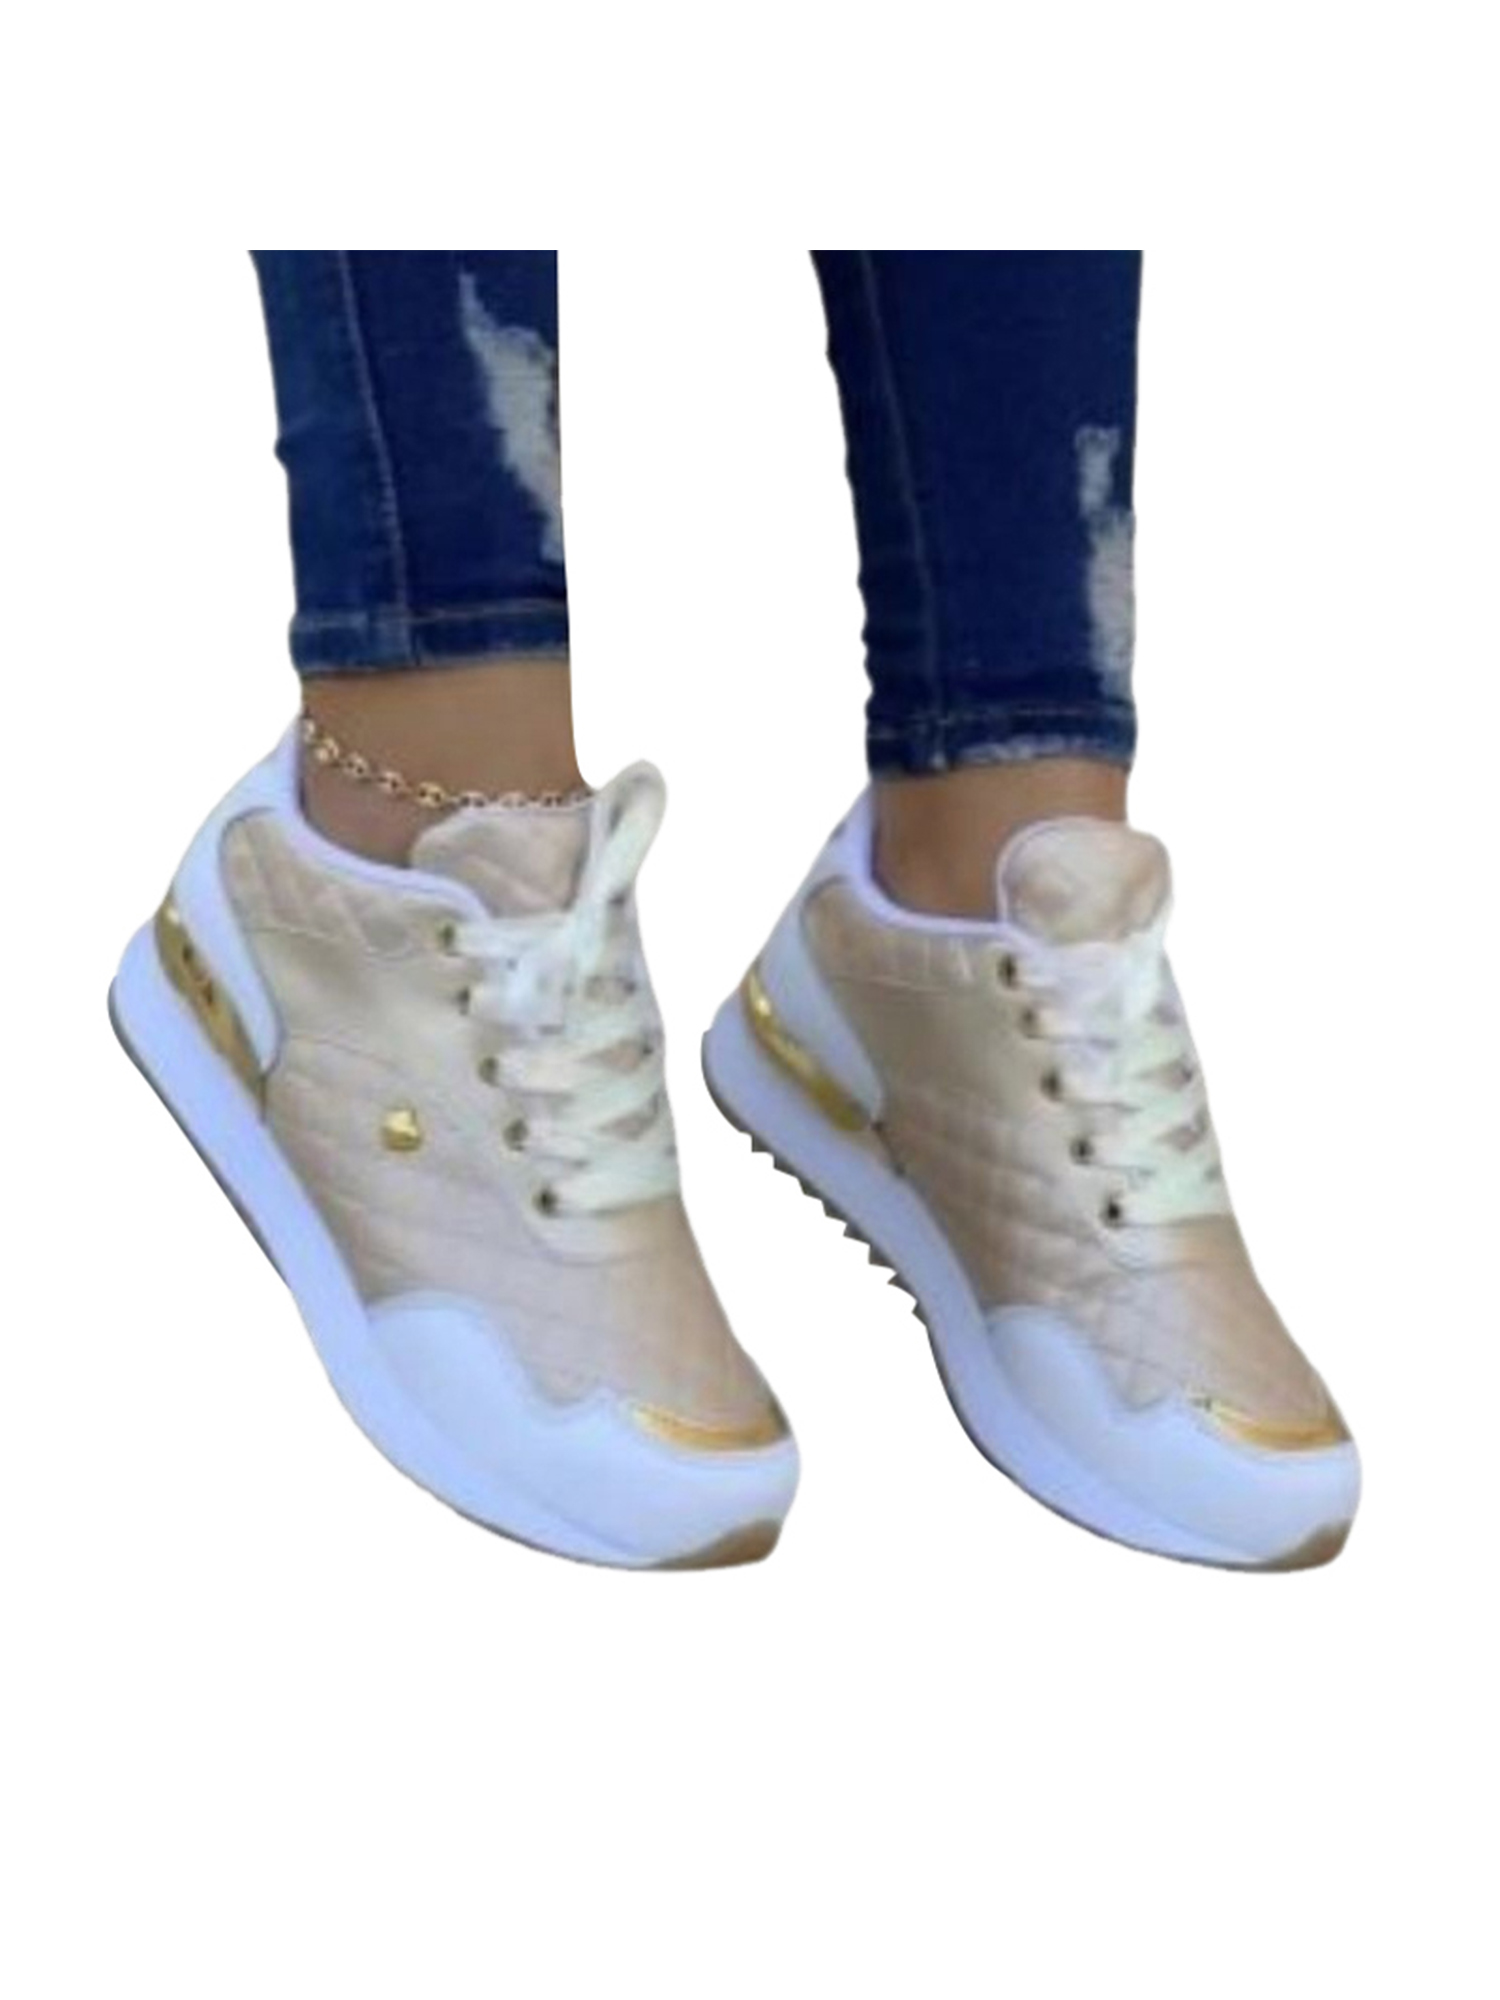 UKAP Ladies Sport Shoes Diamond Sneakers Lace Up Running Shoe Travel  Trainers Non-Slip Athletic Sneaker Apricot 8.5